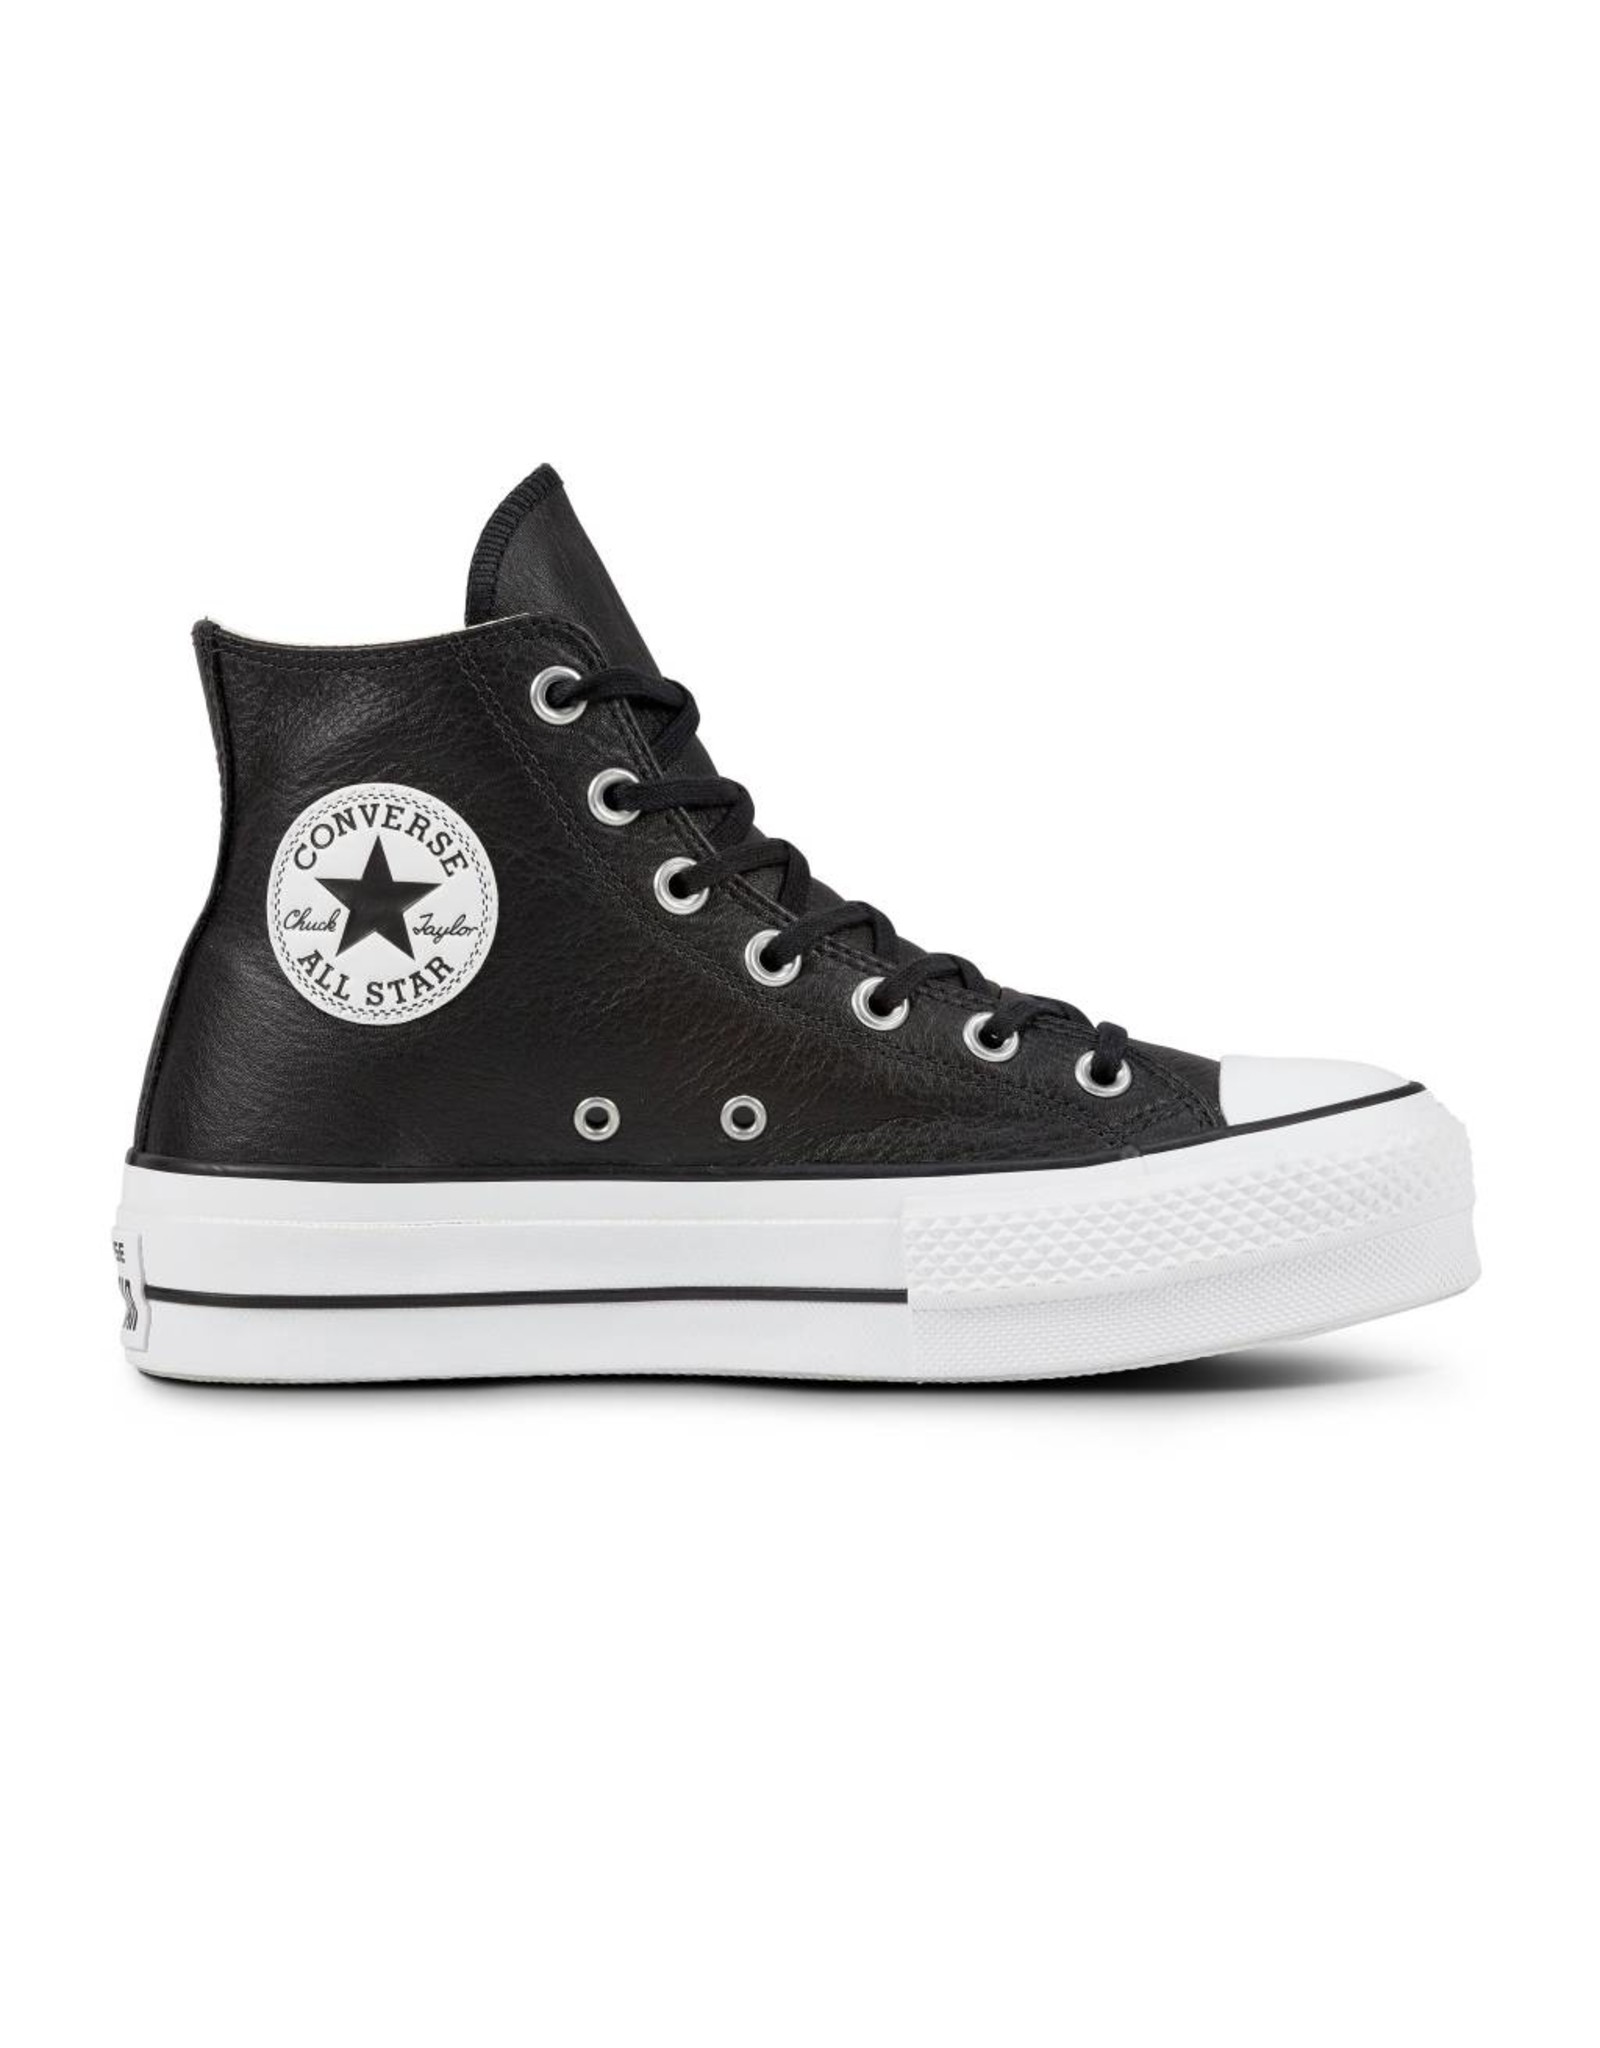 how to clean black chuck taylors